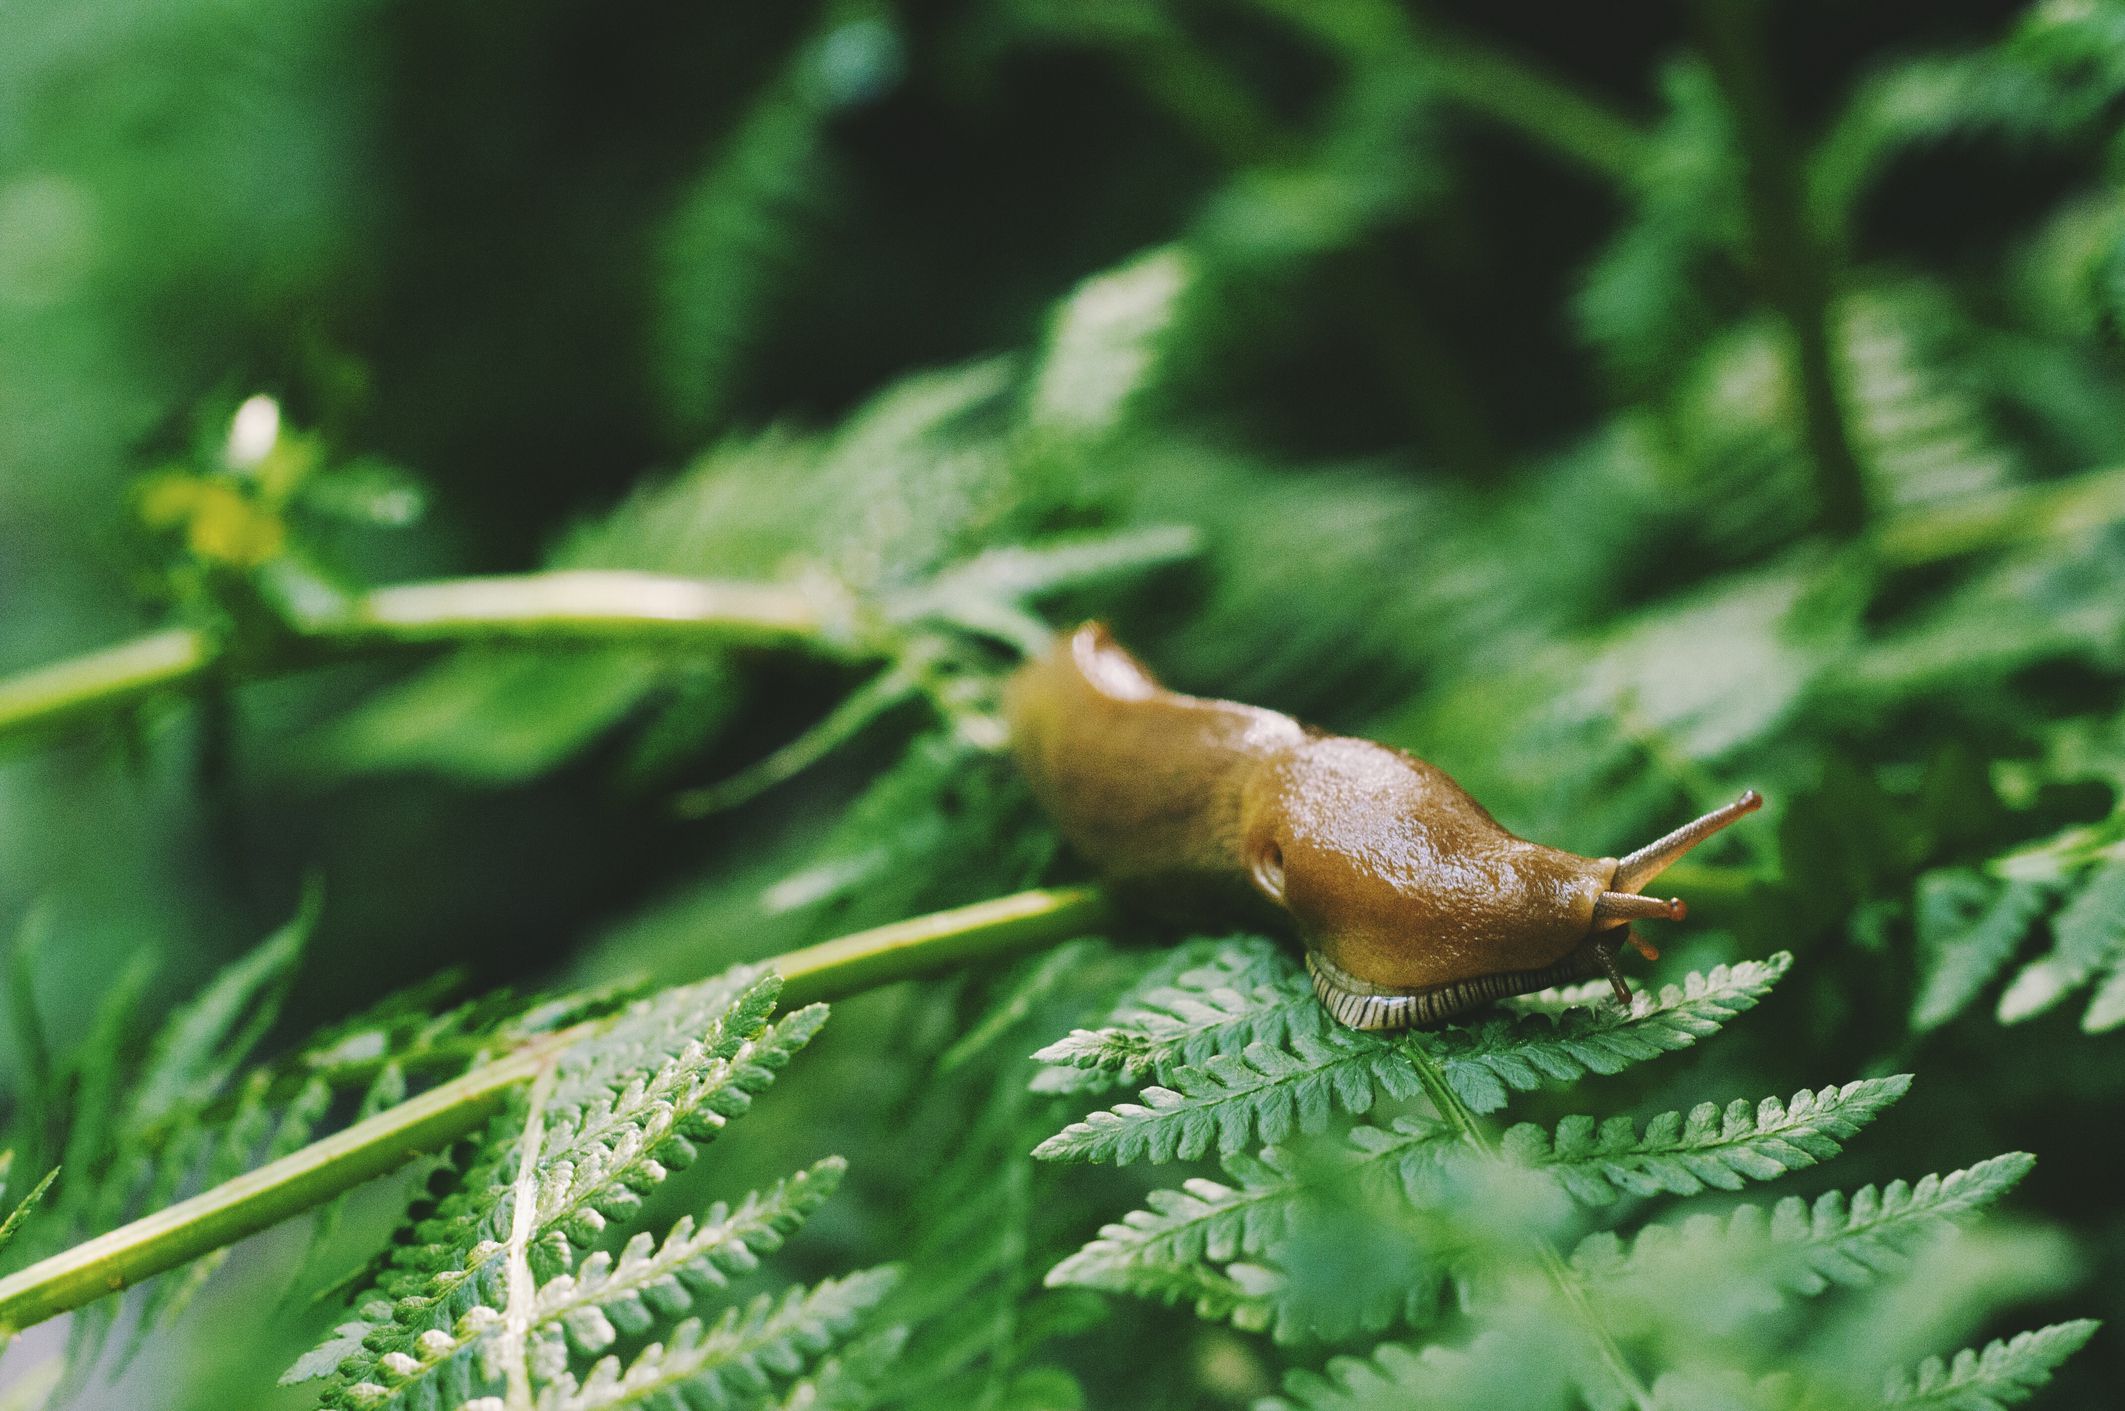 How To Stop Slugs - Prevent Slugs From Eating Plants In Your Garden